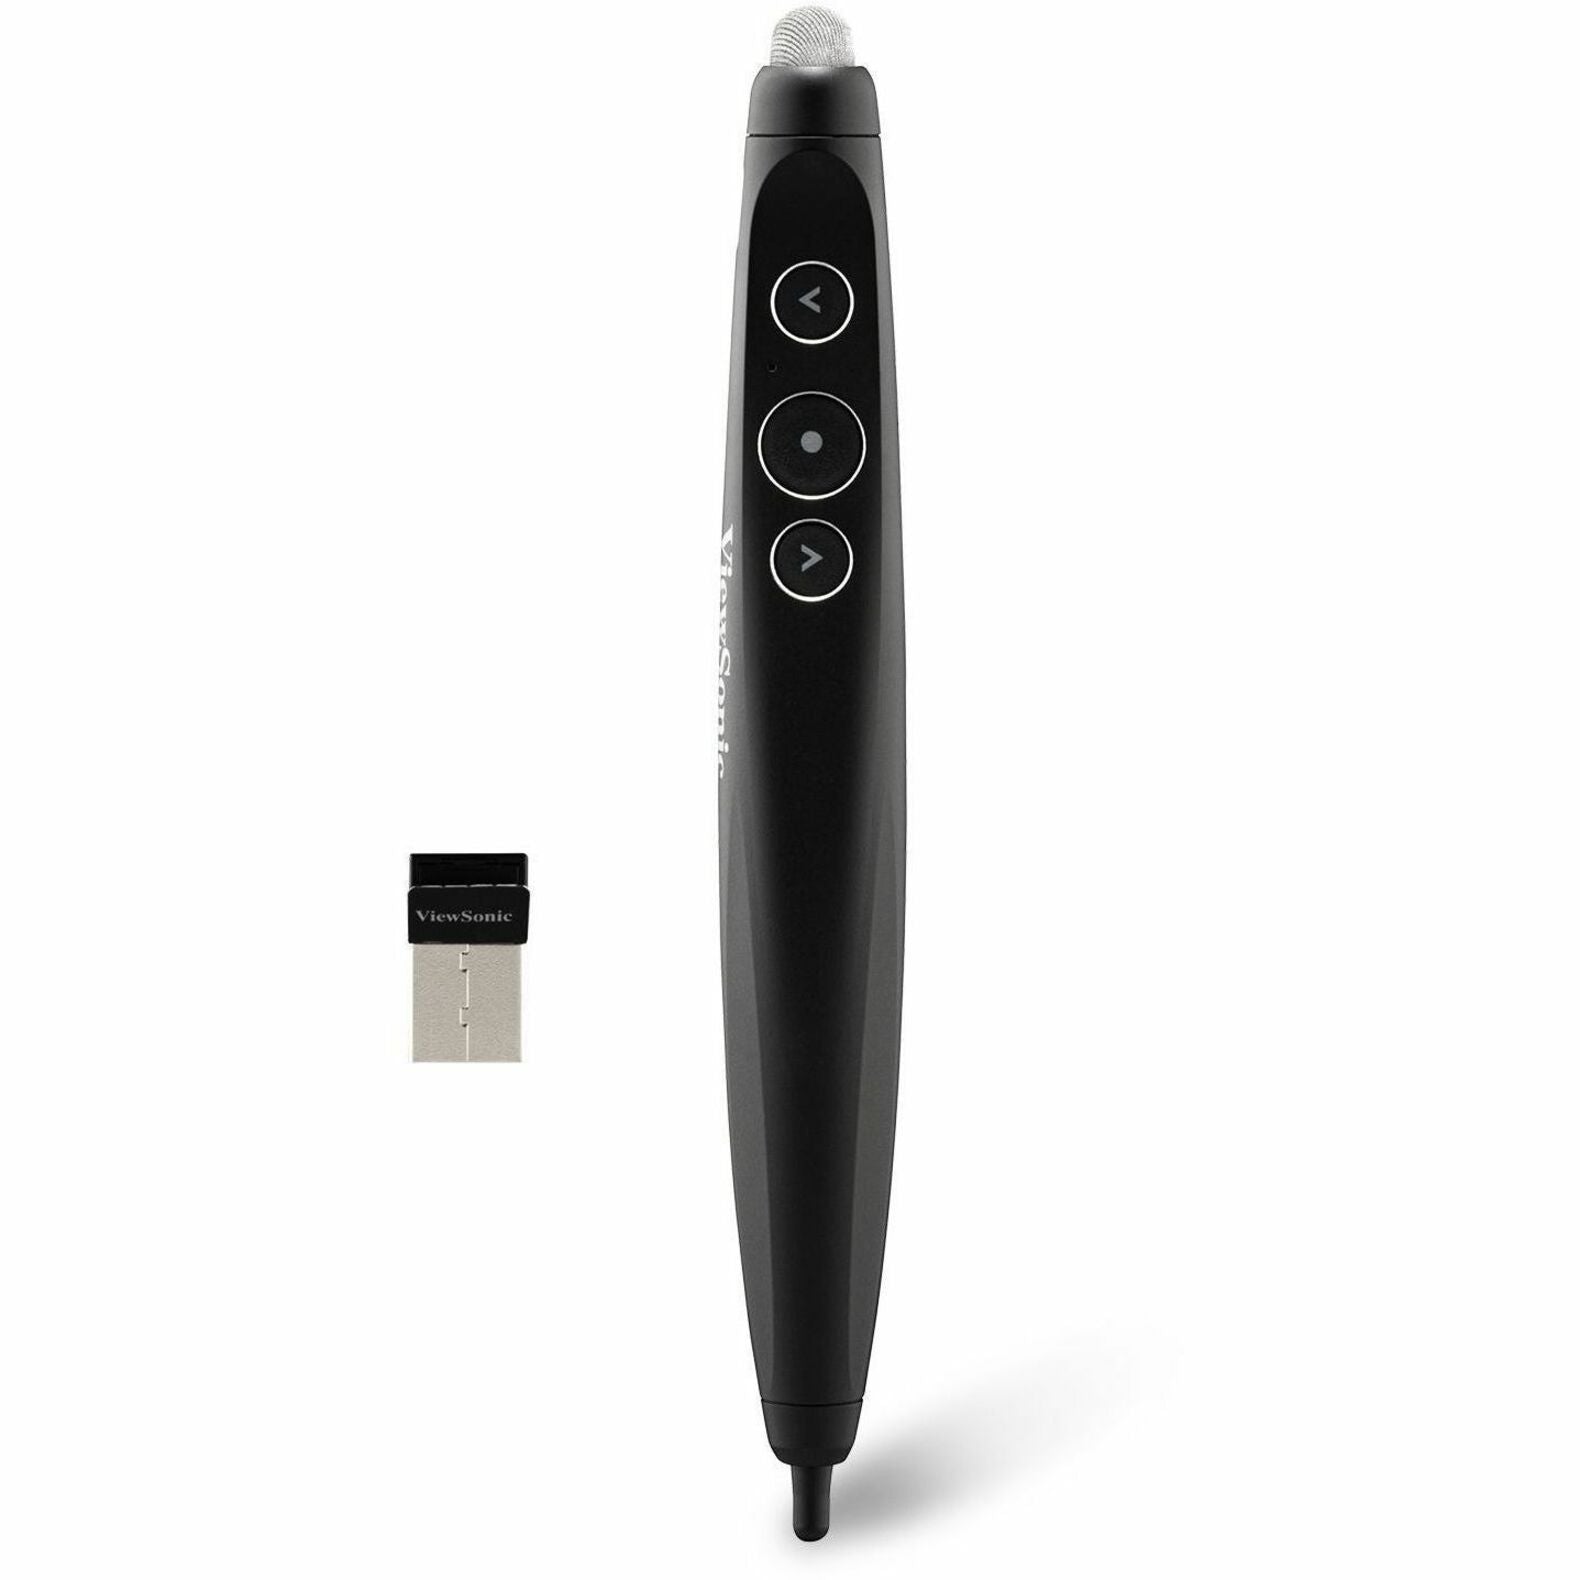 ViewSonic VB-PEN-007 Stylus - Interactive Display Device Supported